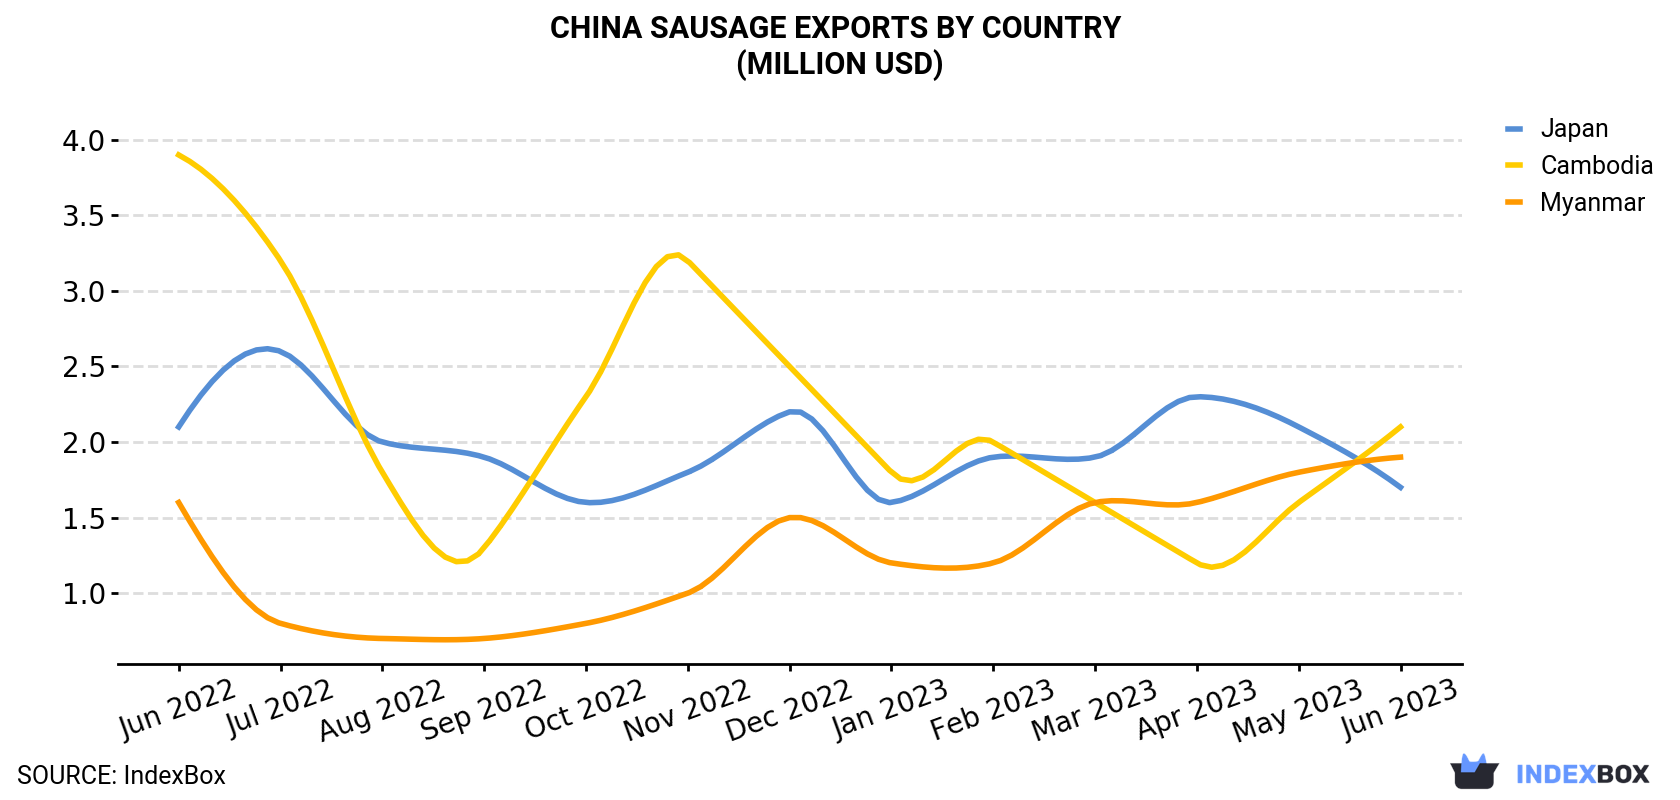 China Sausage Exports By Country (Million USD)